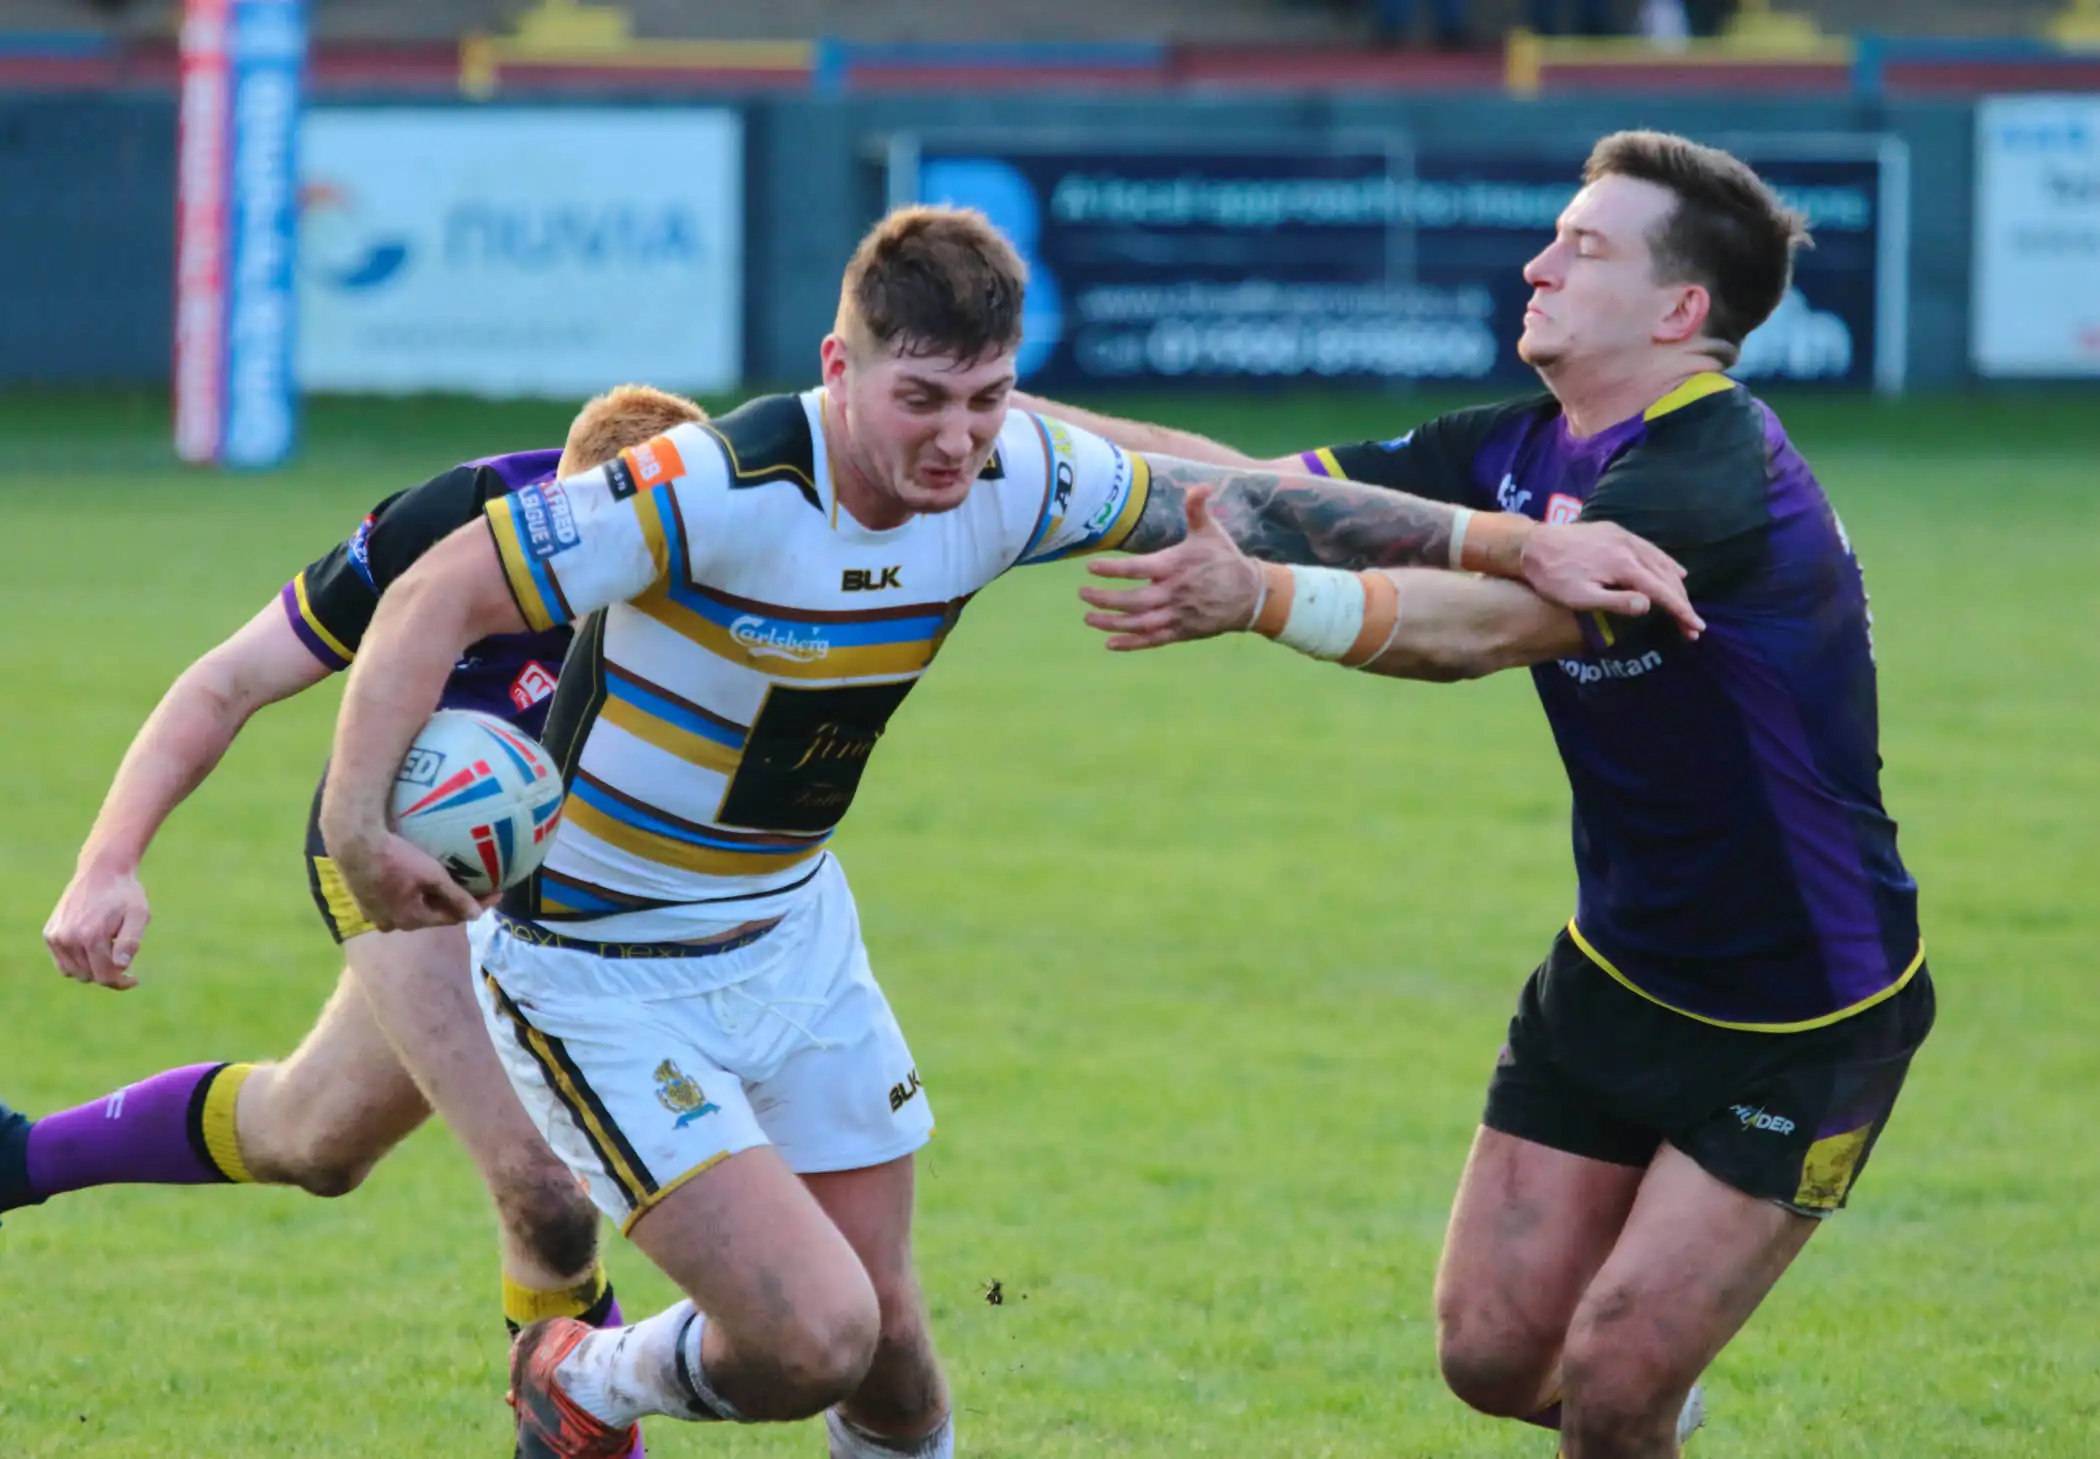 League 1 round-up: Whitehaven edge Oldham, Coventry shock London,14-try Doncaster rout West Wales